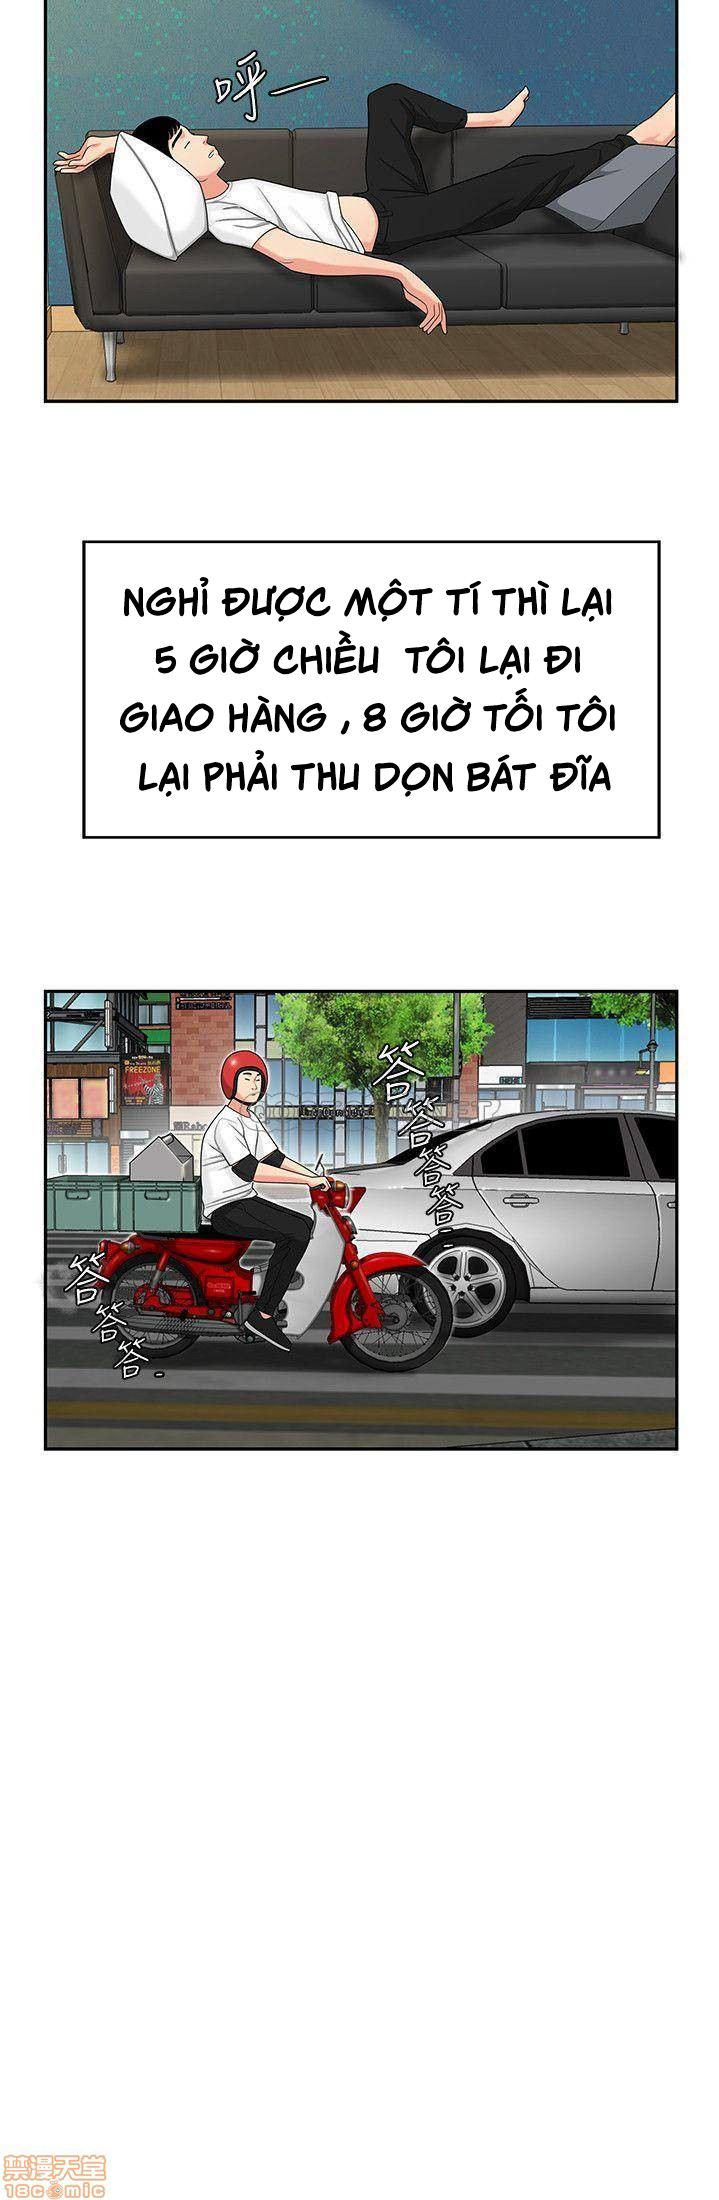 Chapter 001 : Chapter 01 ảnh 19